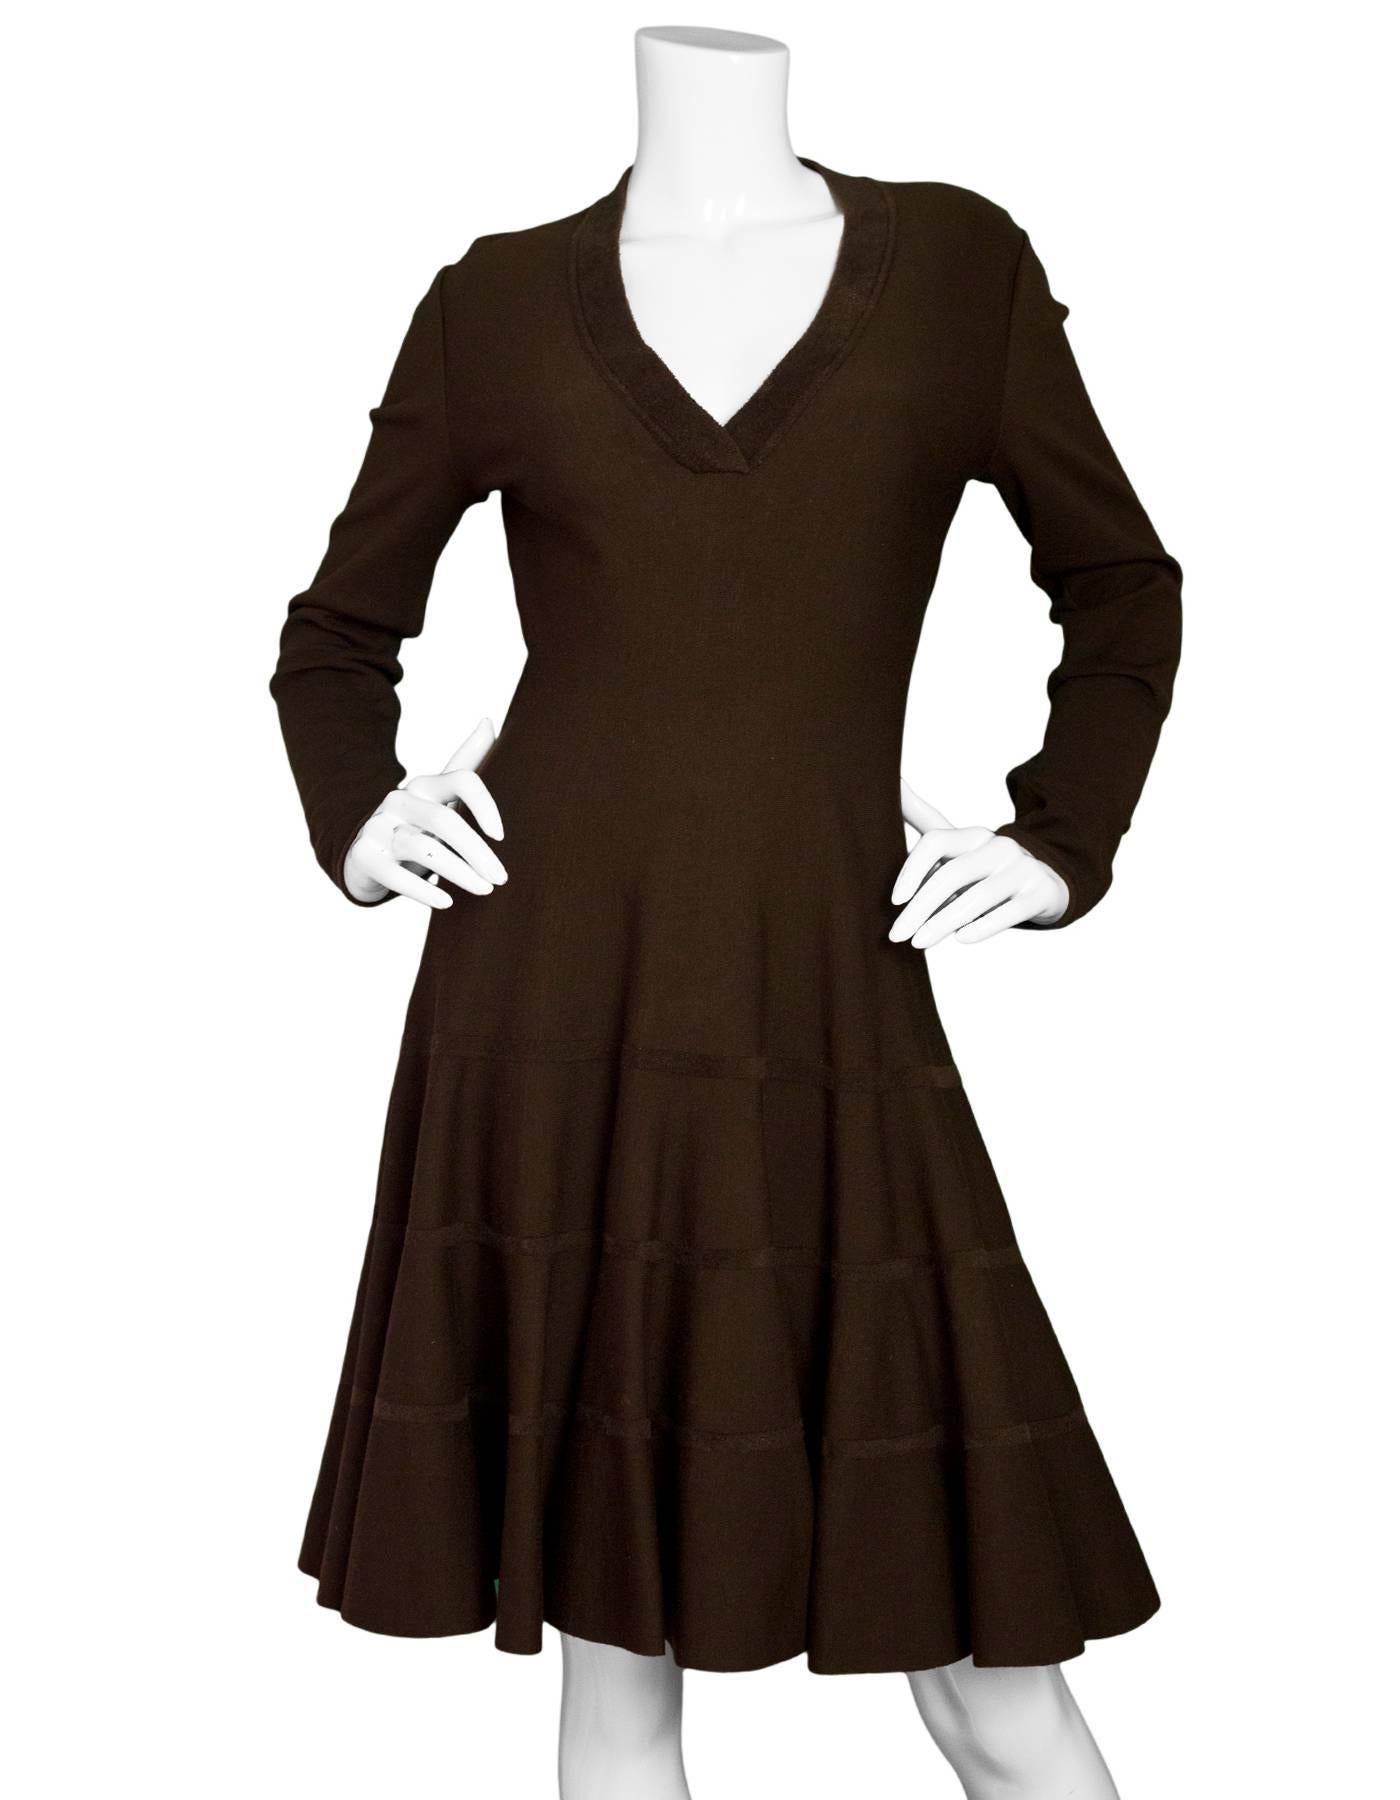 Alaia Brown Wool Fit & Flare V-Neck Dress Sz FR42

Made In: Italy
Color: Brown
Composition: 78% Wool, 12% polyester, 6% cupro, 4% nylon
Lining: None
Closure/opening: Back center zip up
Exterior Pockets: None
Interior Pockets: None
Overall Condition: